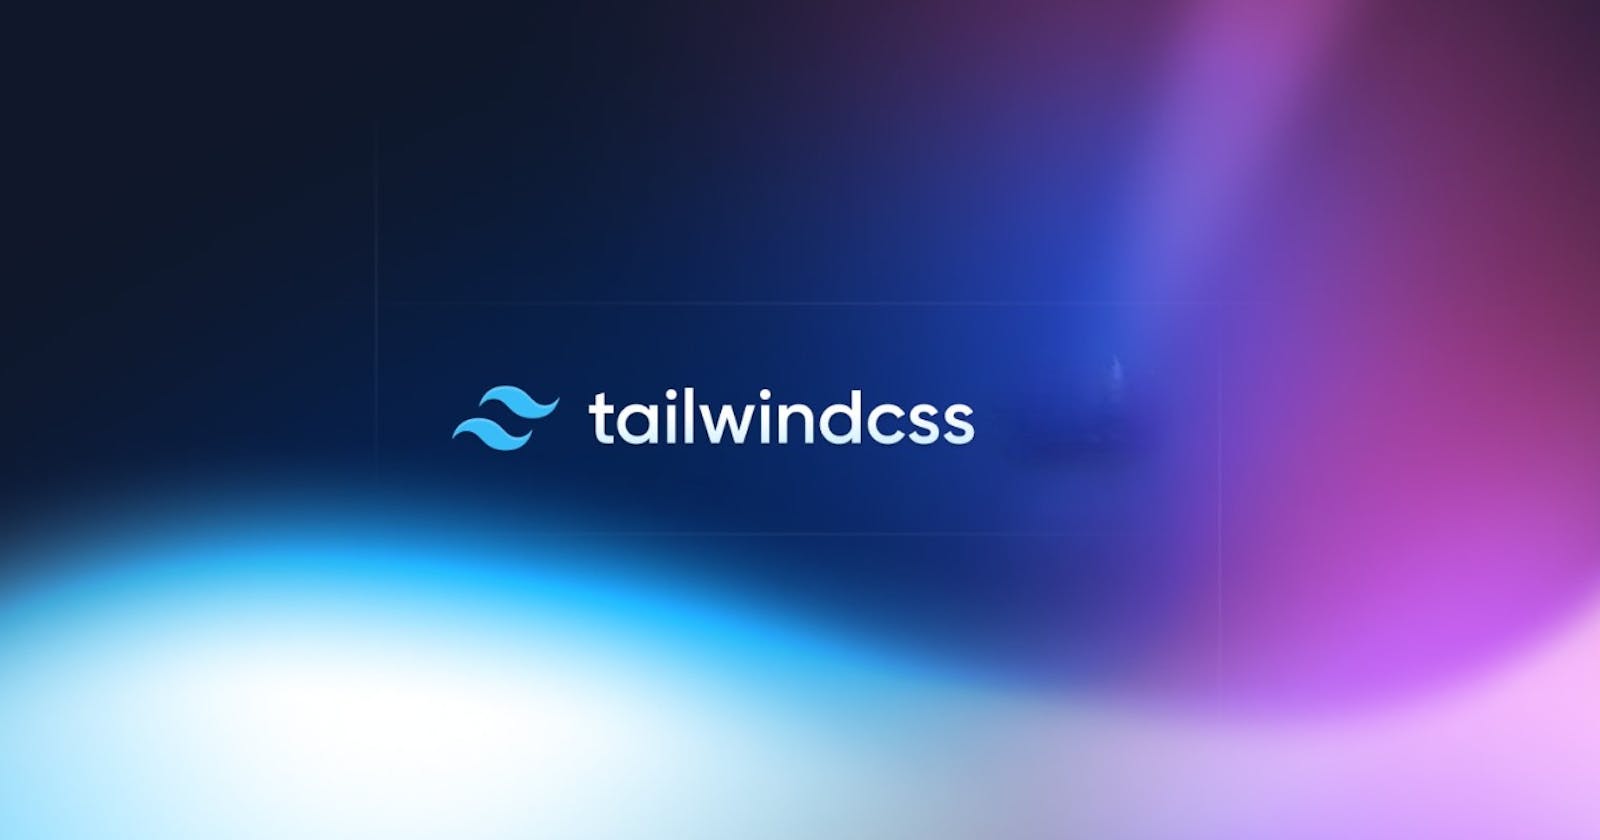 Tailwind CSS: The utility-first approach to styling